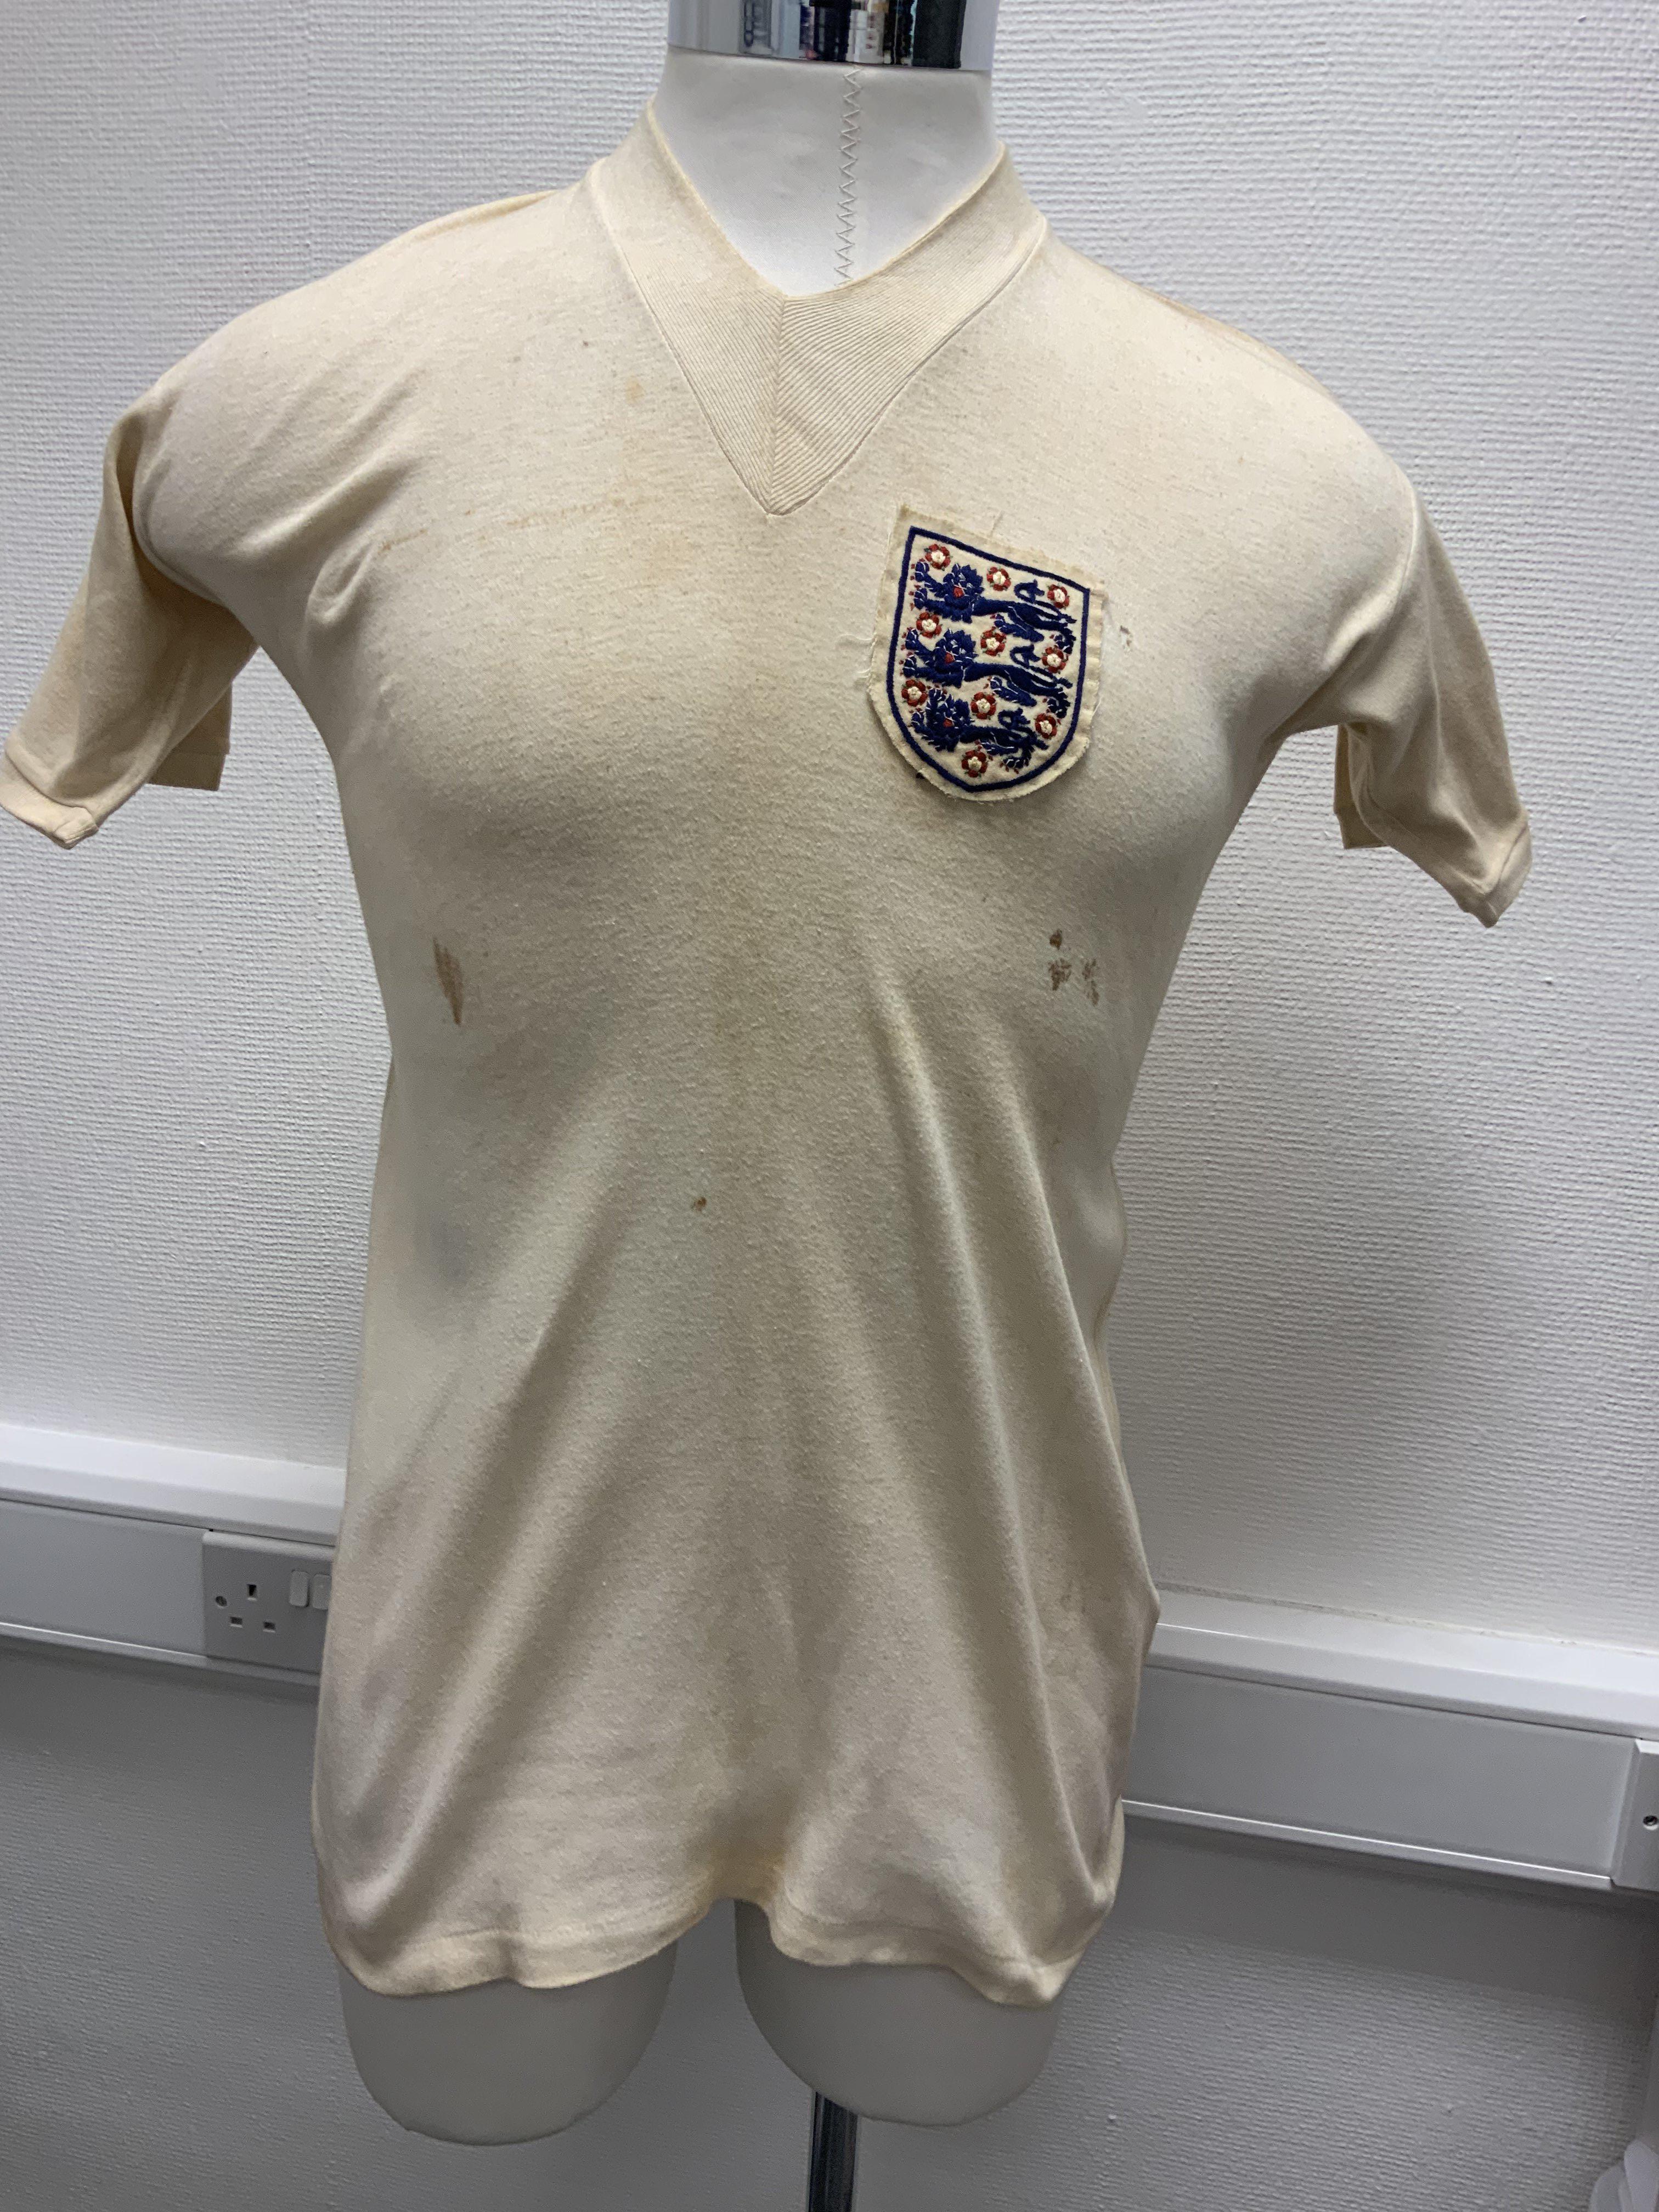 1950s Maurice Setters England Youth Match Worn Football Shirt: White short sleeve with 3 Lions